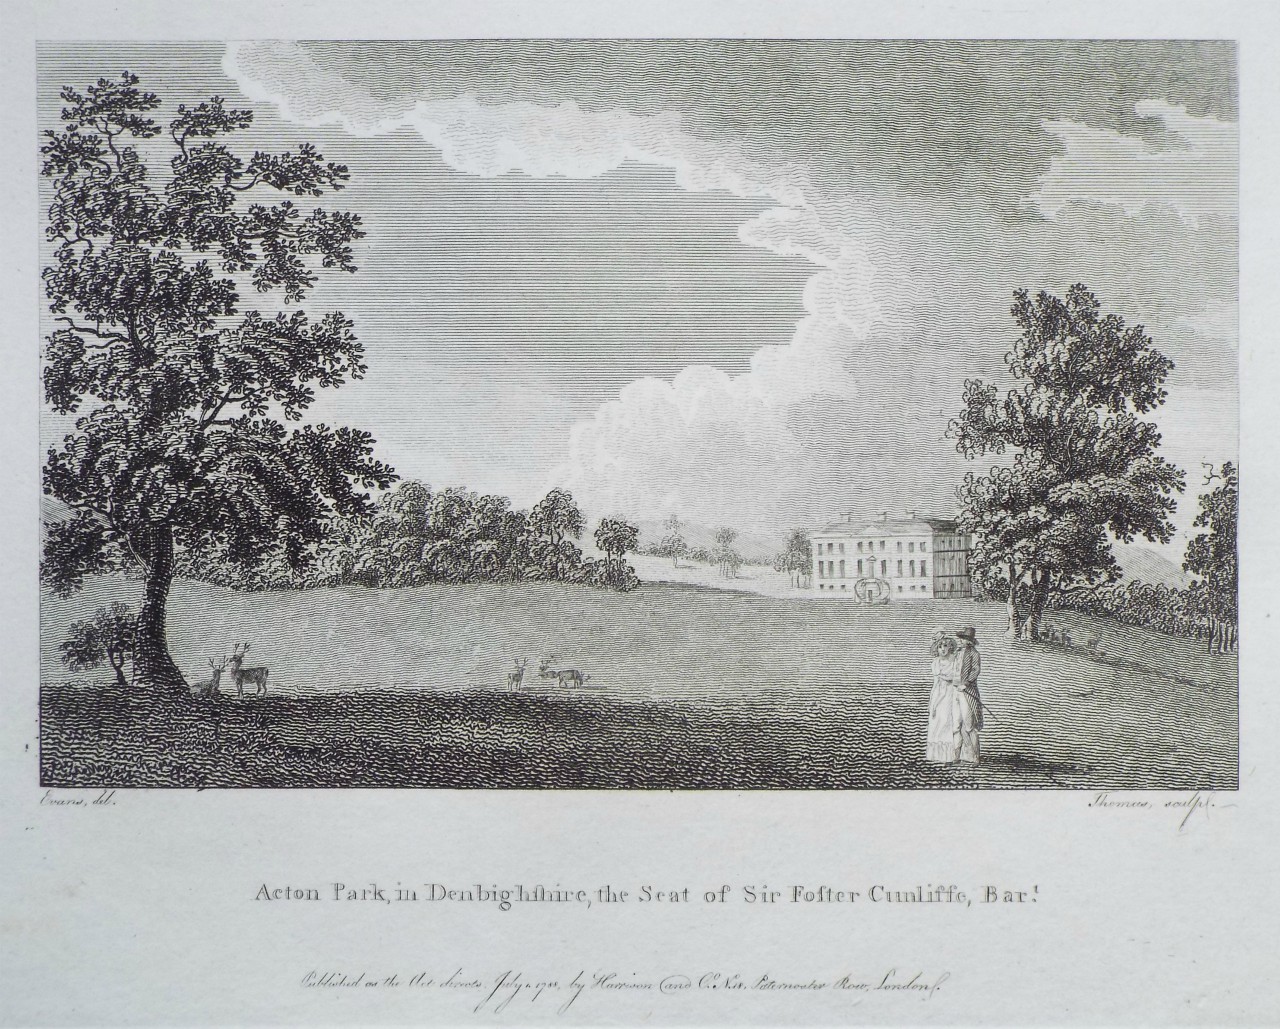 Print - Acton Park, in Denbighshire, the Seat of Sir Foster Cunliffe, Bart. - 